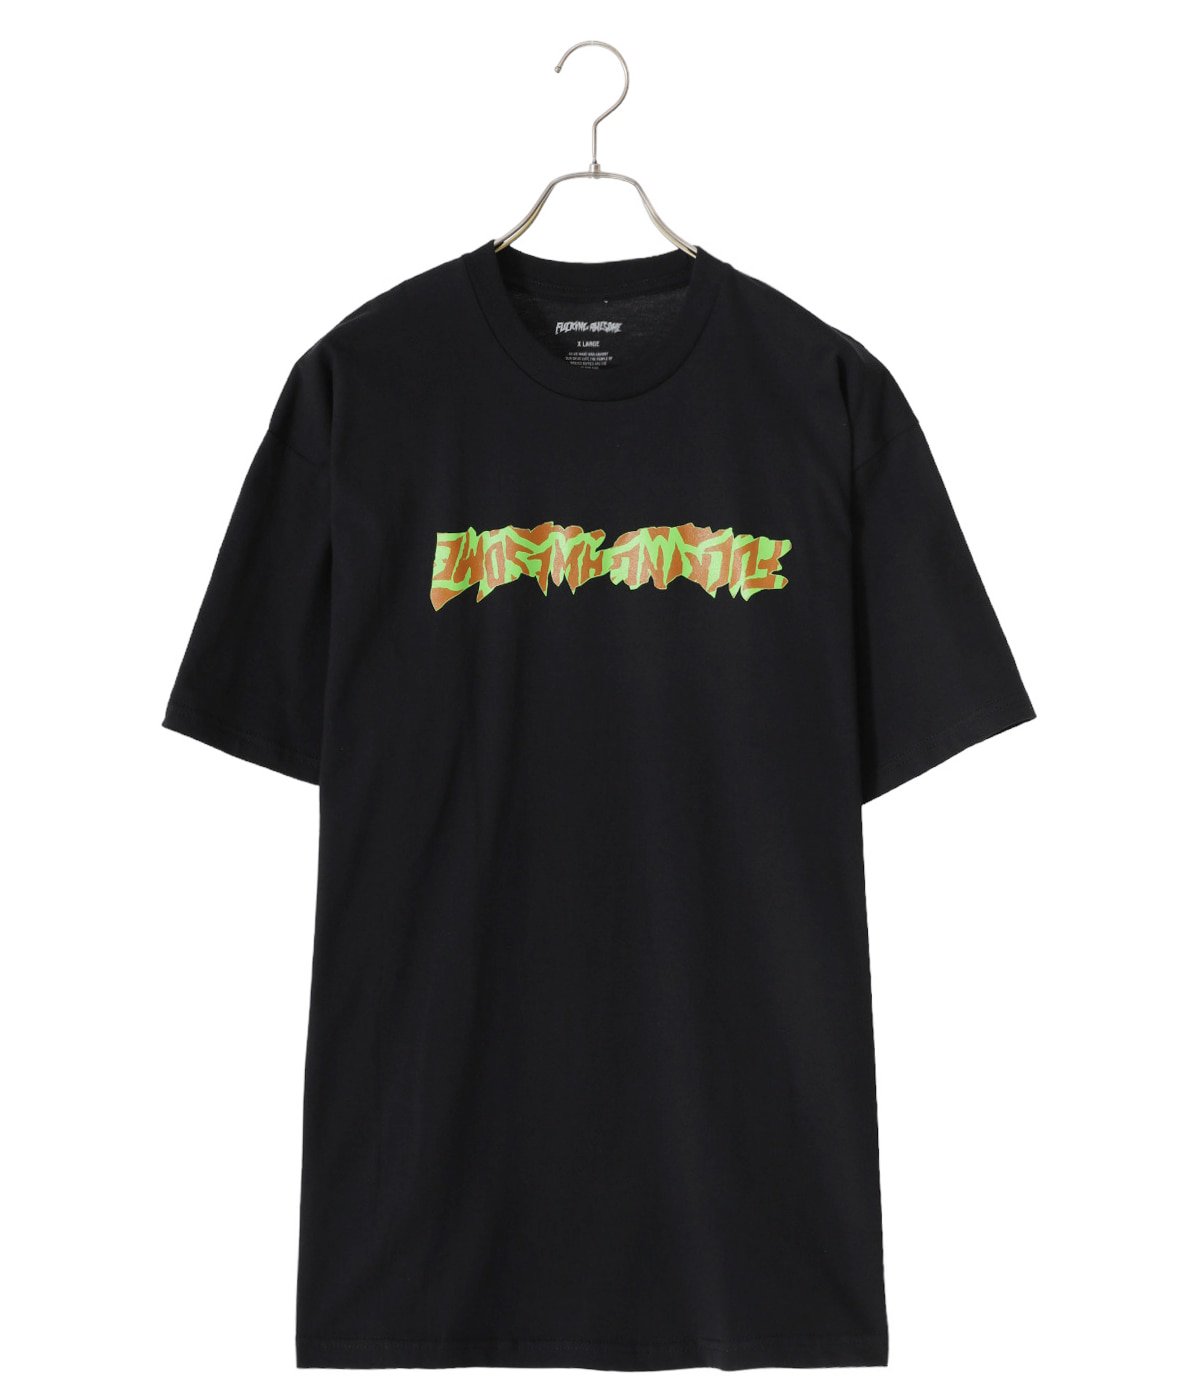 Cut Out Logo Tee | FUCKING AWESOME(ファッキンオーサム) / トップス ...